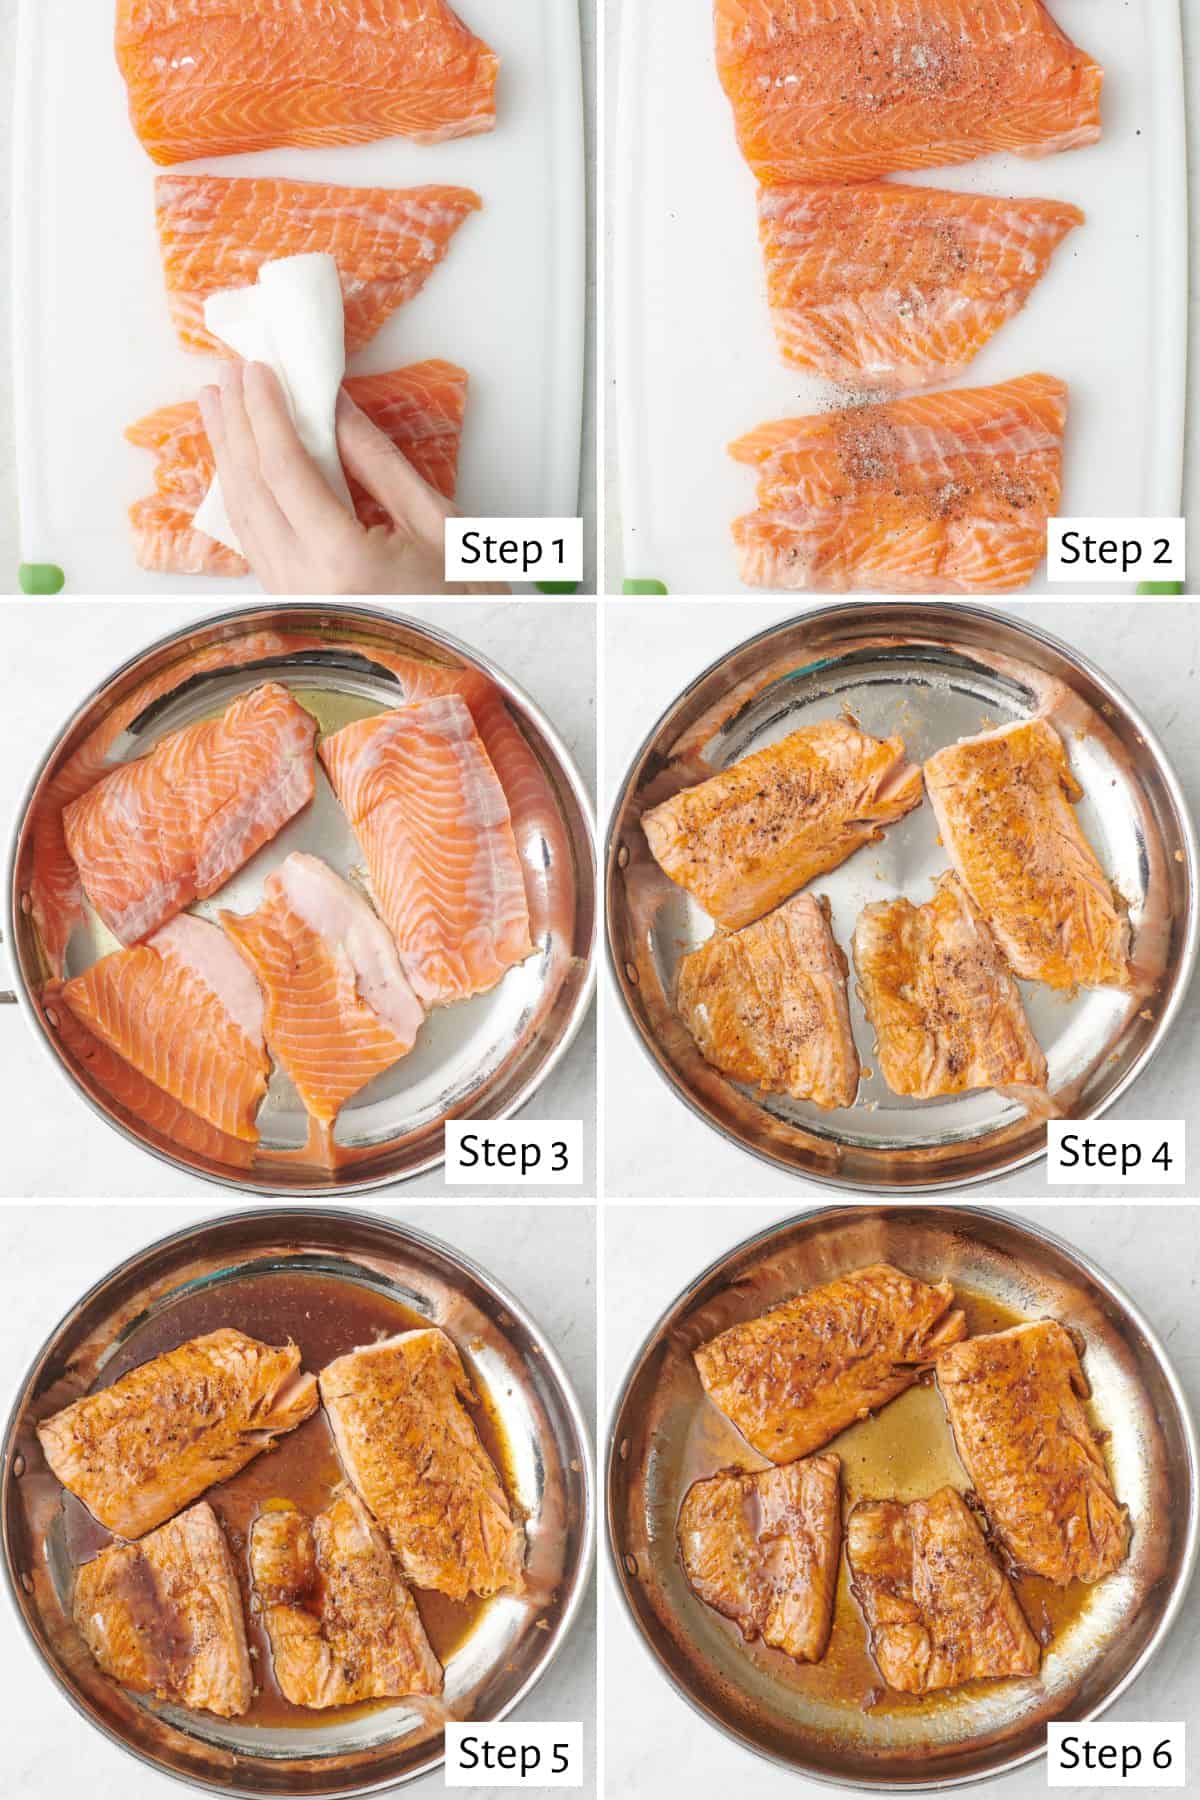 6 image collage making recipe: 1- patting salmon dry with paper towels, 2- salmon seasoned with salt and pepper, 3- salmon in a skillet, 4- after flipping over, 5- glazed poured over, 6- after the glaze has thickened and coats the salmon.